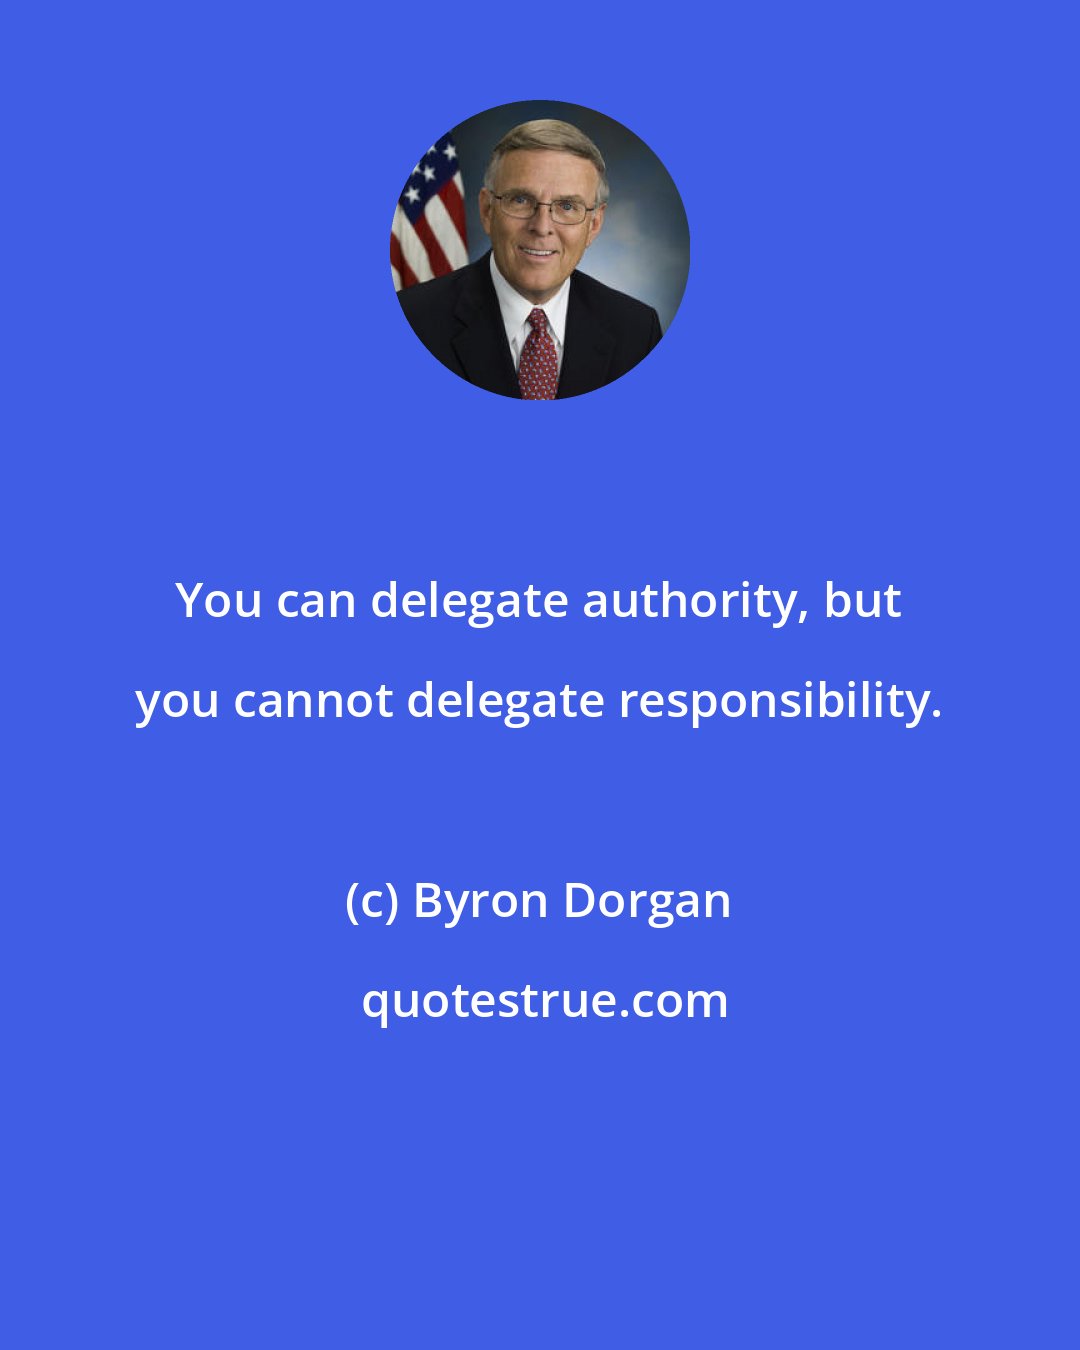 Byron Dorgan: You can delegate authority, but you cannot delegate responsibility.